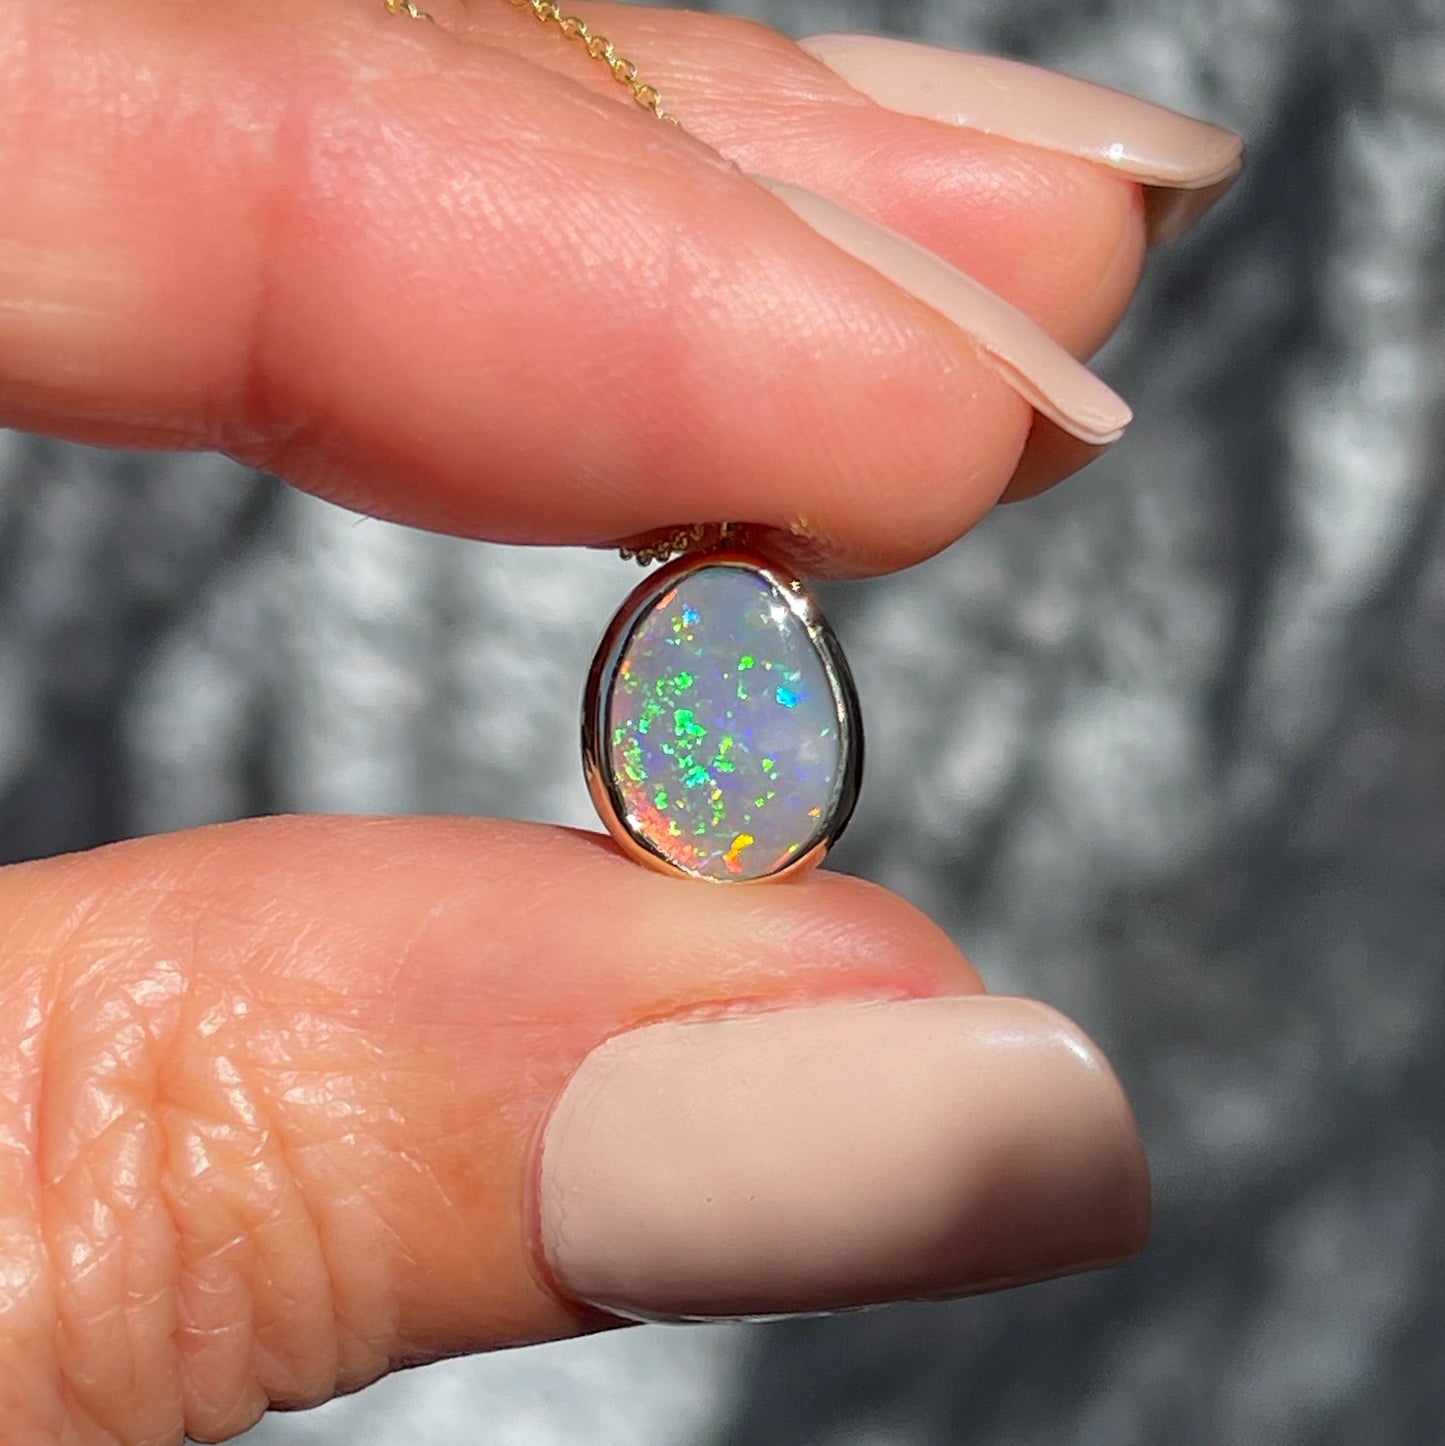 An Australian Opal Necklace by NIXIN Jewelry. An opal pendant necklace with a black opal.